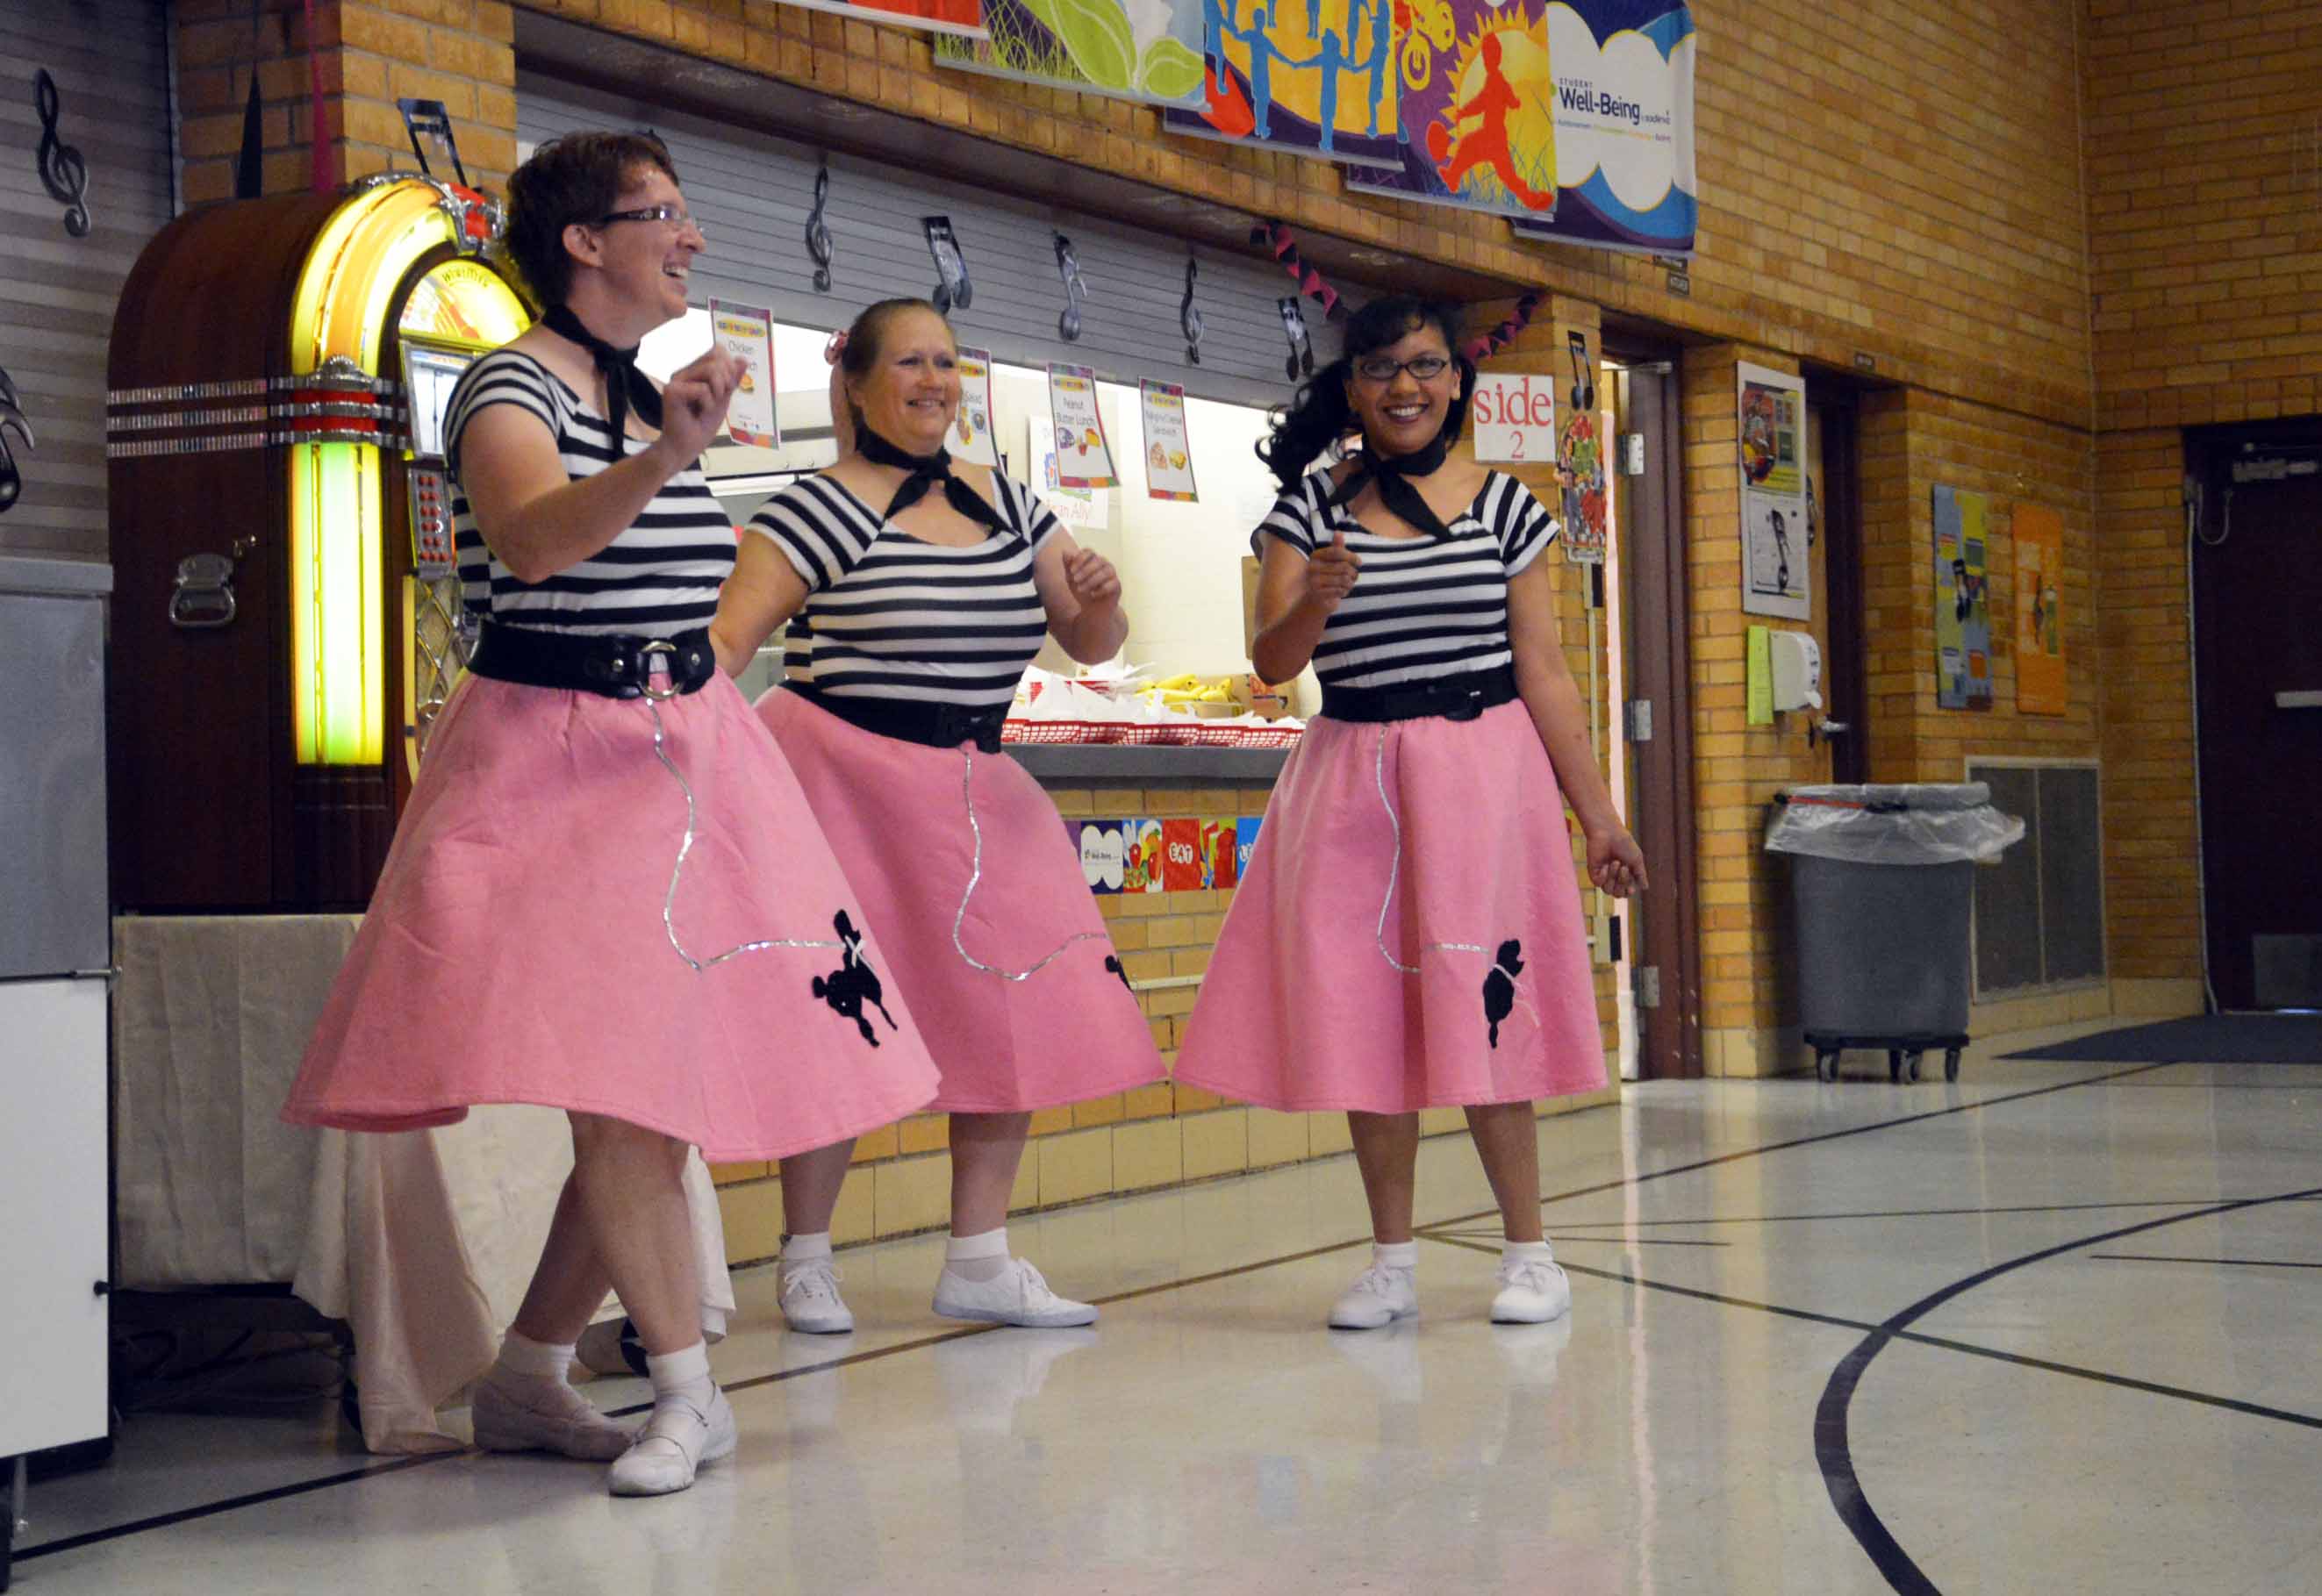 Photo Gallery: Lunch ladies rock the 50s